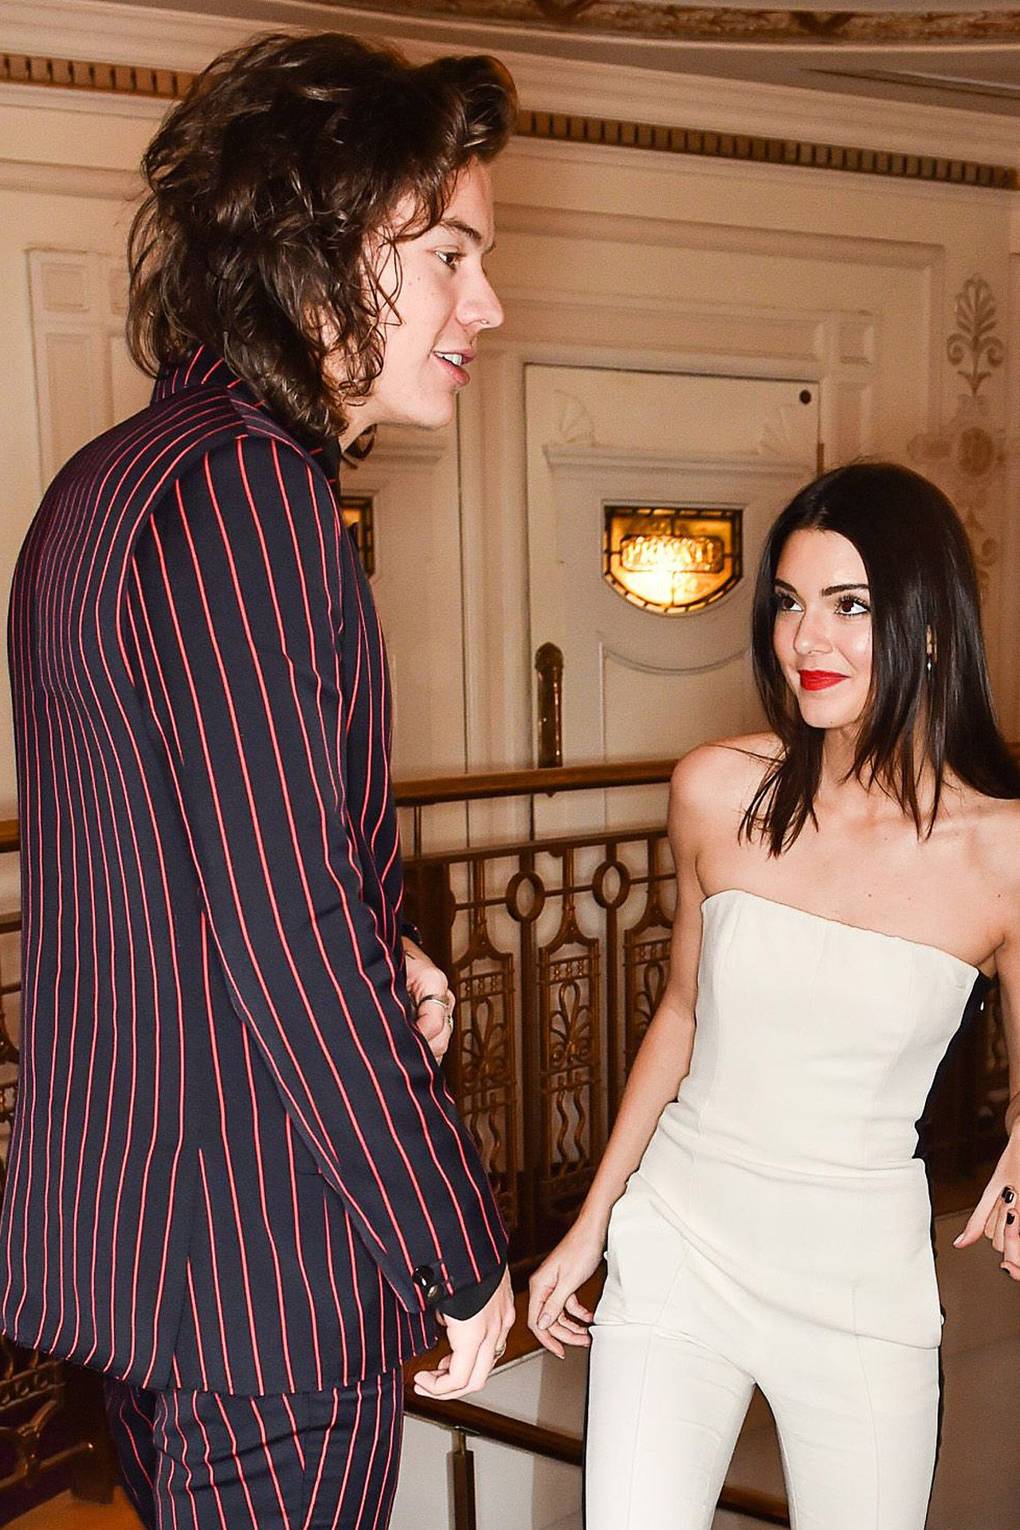 Harry Styles And Kendall Jenners Relationship History